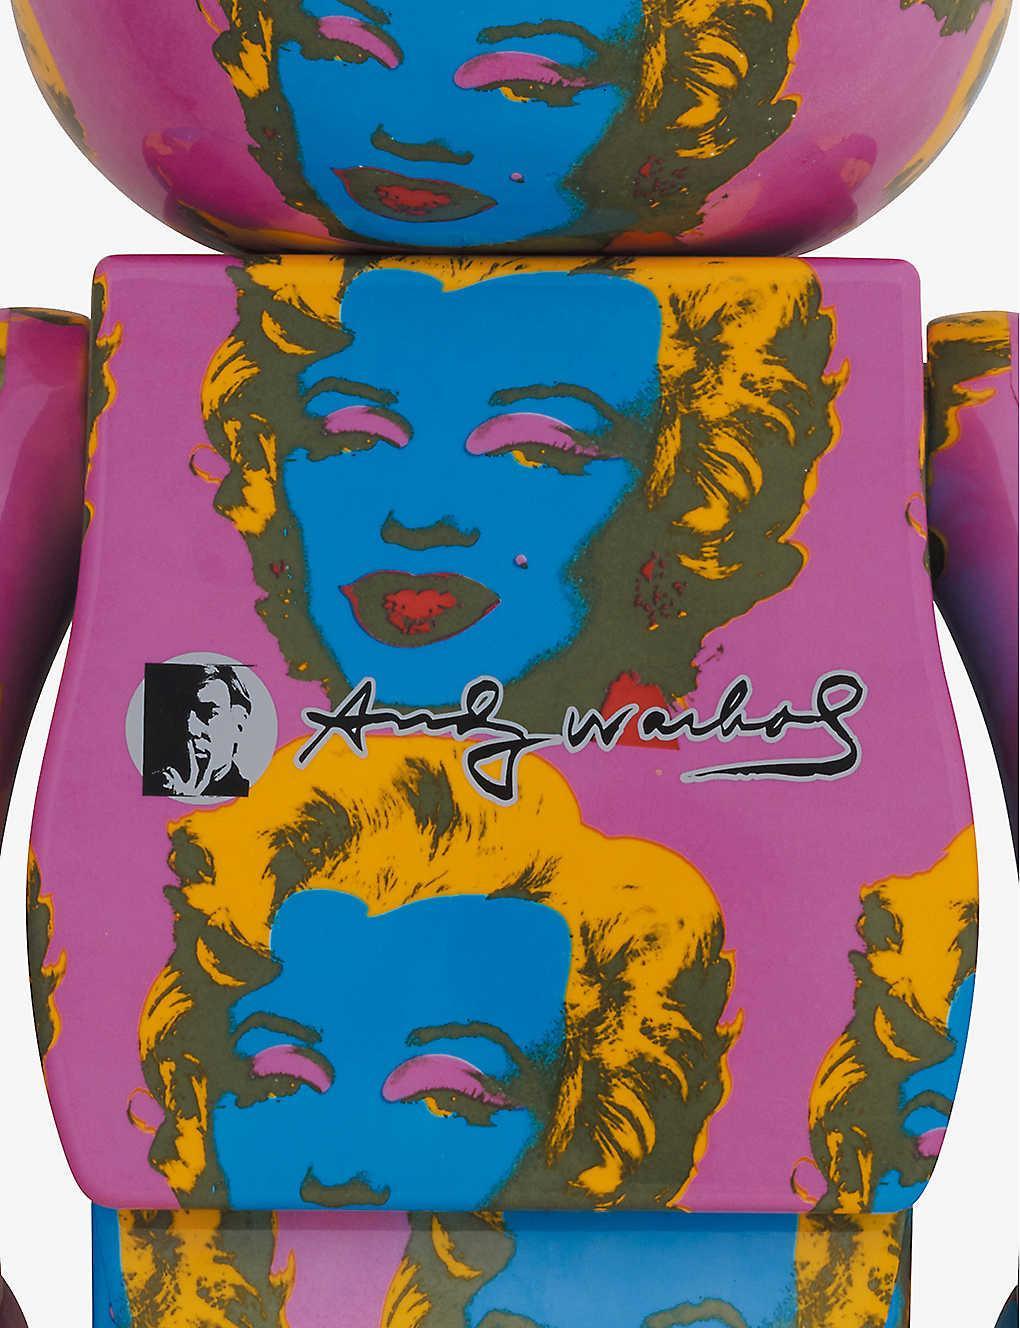 BE@RBRICK Andy Warhol's Marilyn Monroe #2 1000 by Medicom Toy (Limited  Edition Art Toy Collectible)